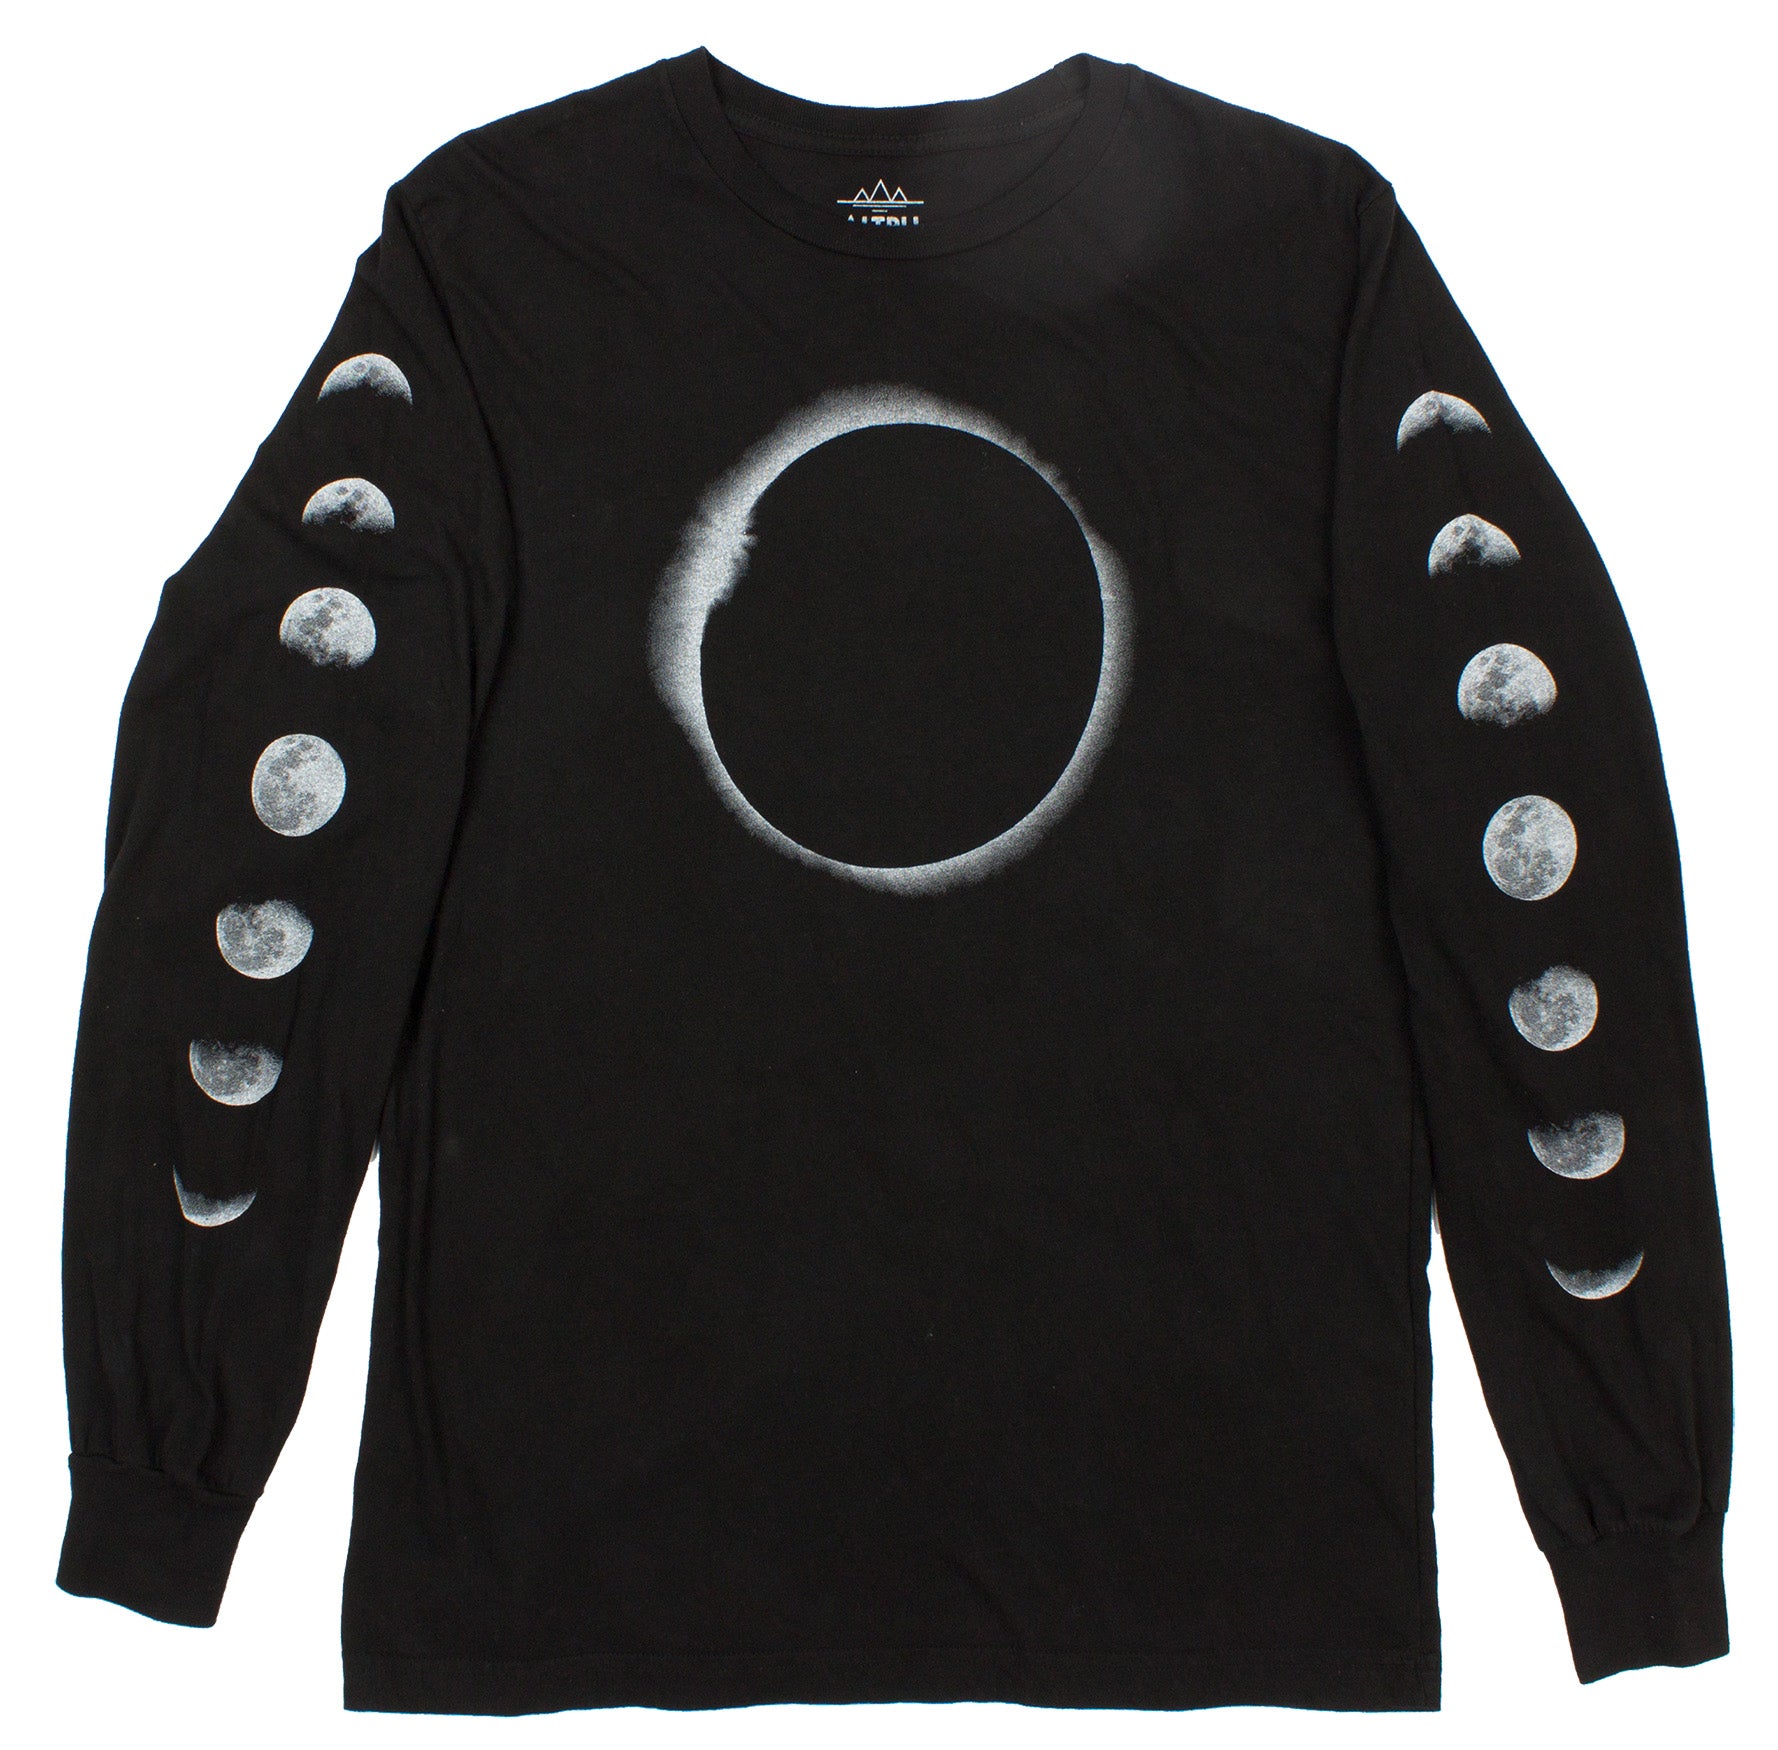 Buy Lunar Eclipse with Moon Phases long sleeve shirt by Altru